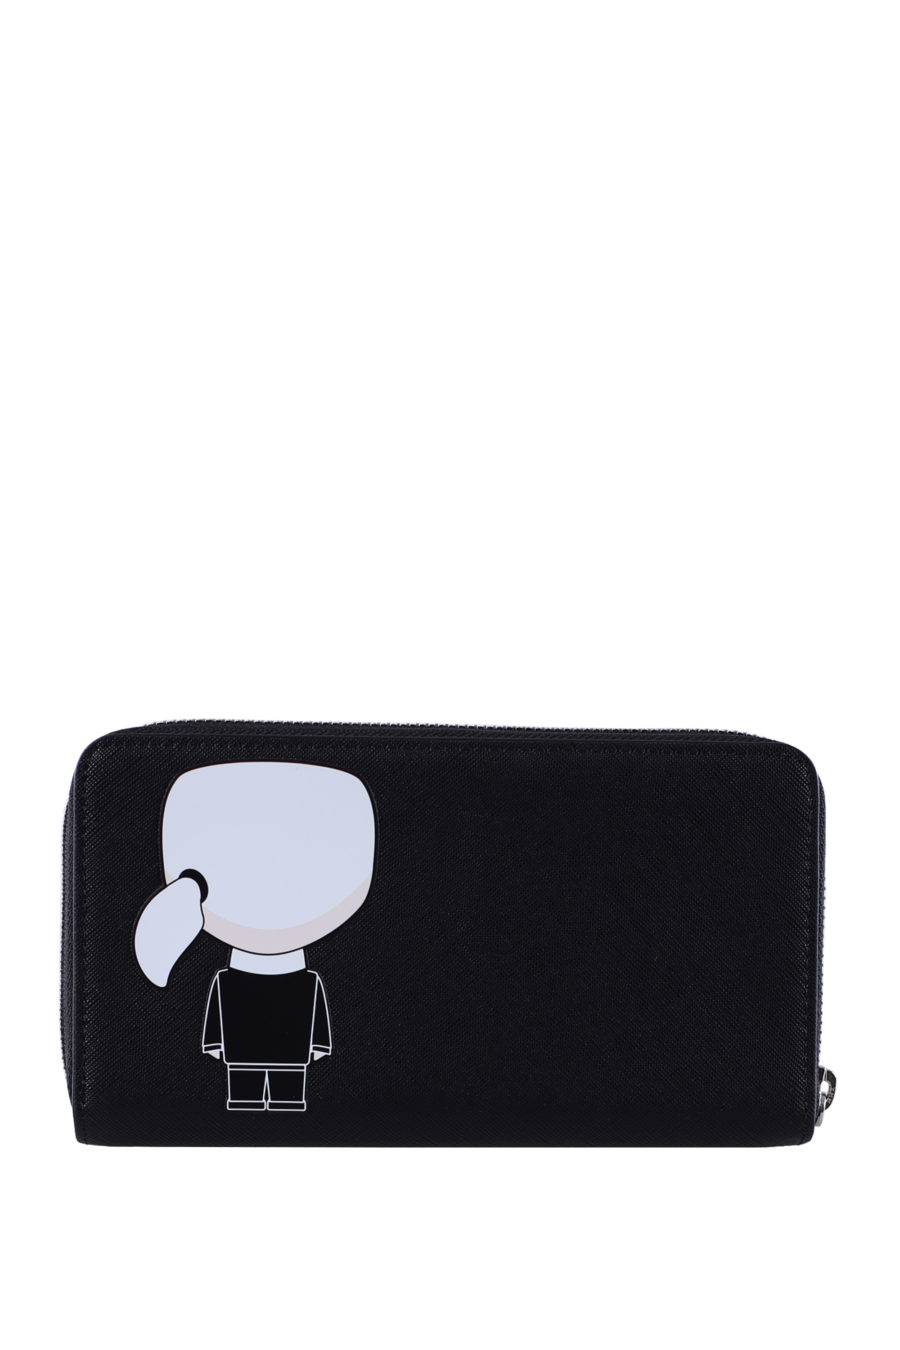 Black zipped wallet with brand logo - IMG 0031